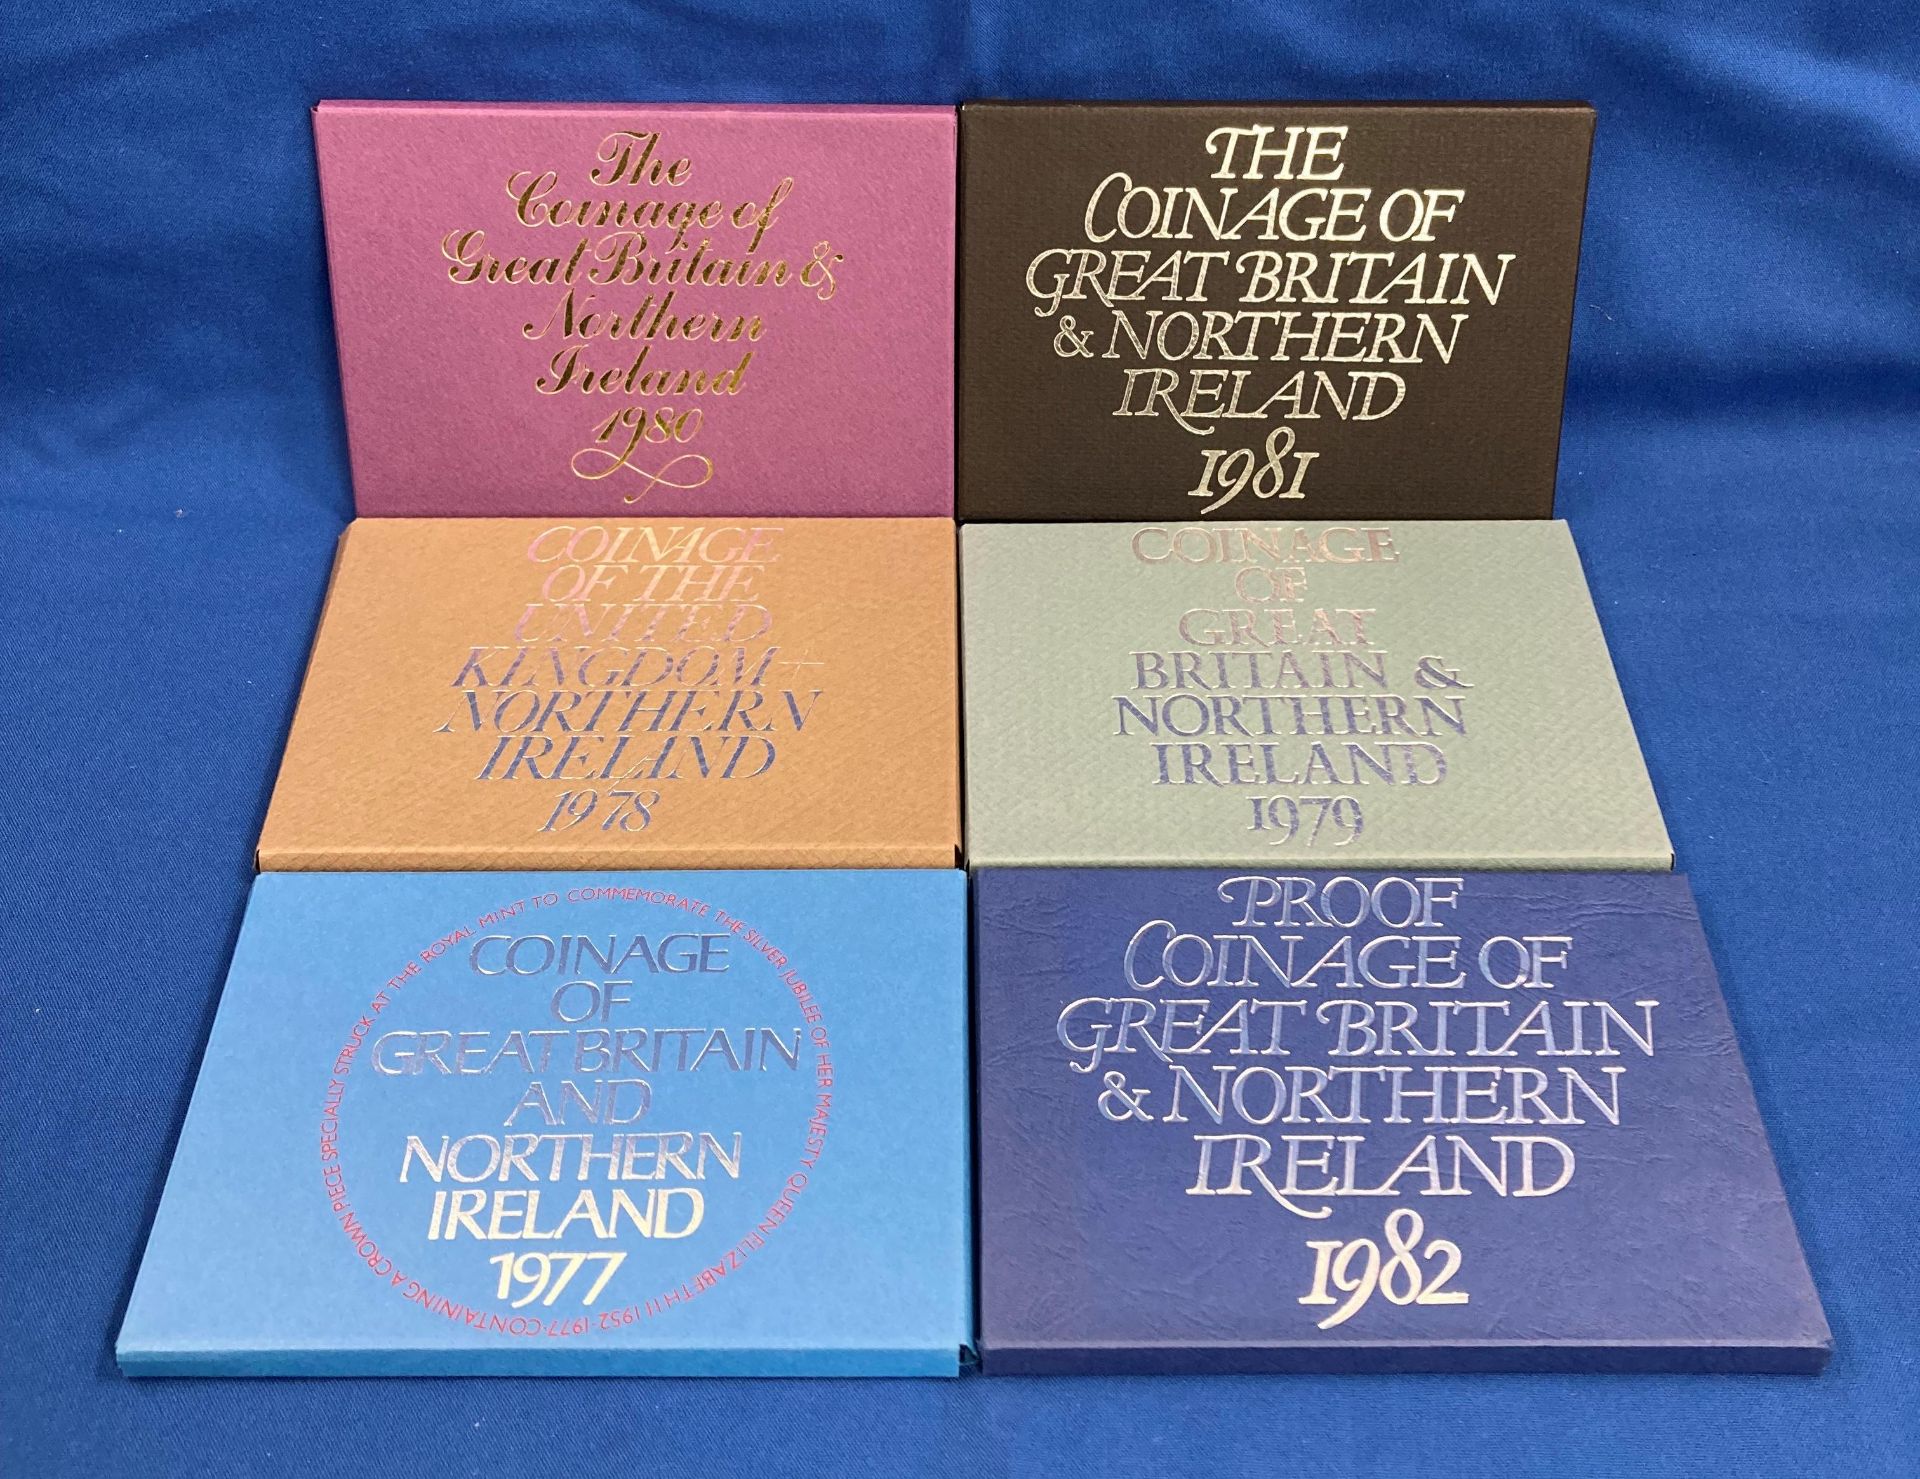 Six sets of Royal Mint 1977-1982 Coinage of Great Britain & Northern Ireland (saleroom location: S3 - Image 5 of 5